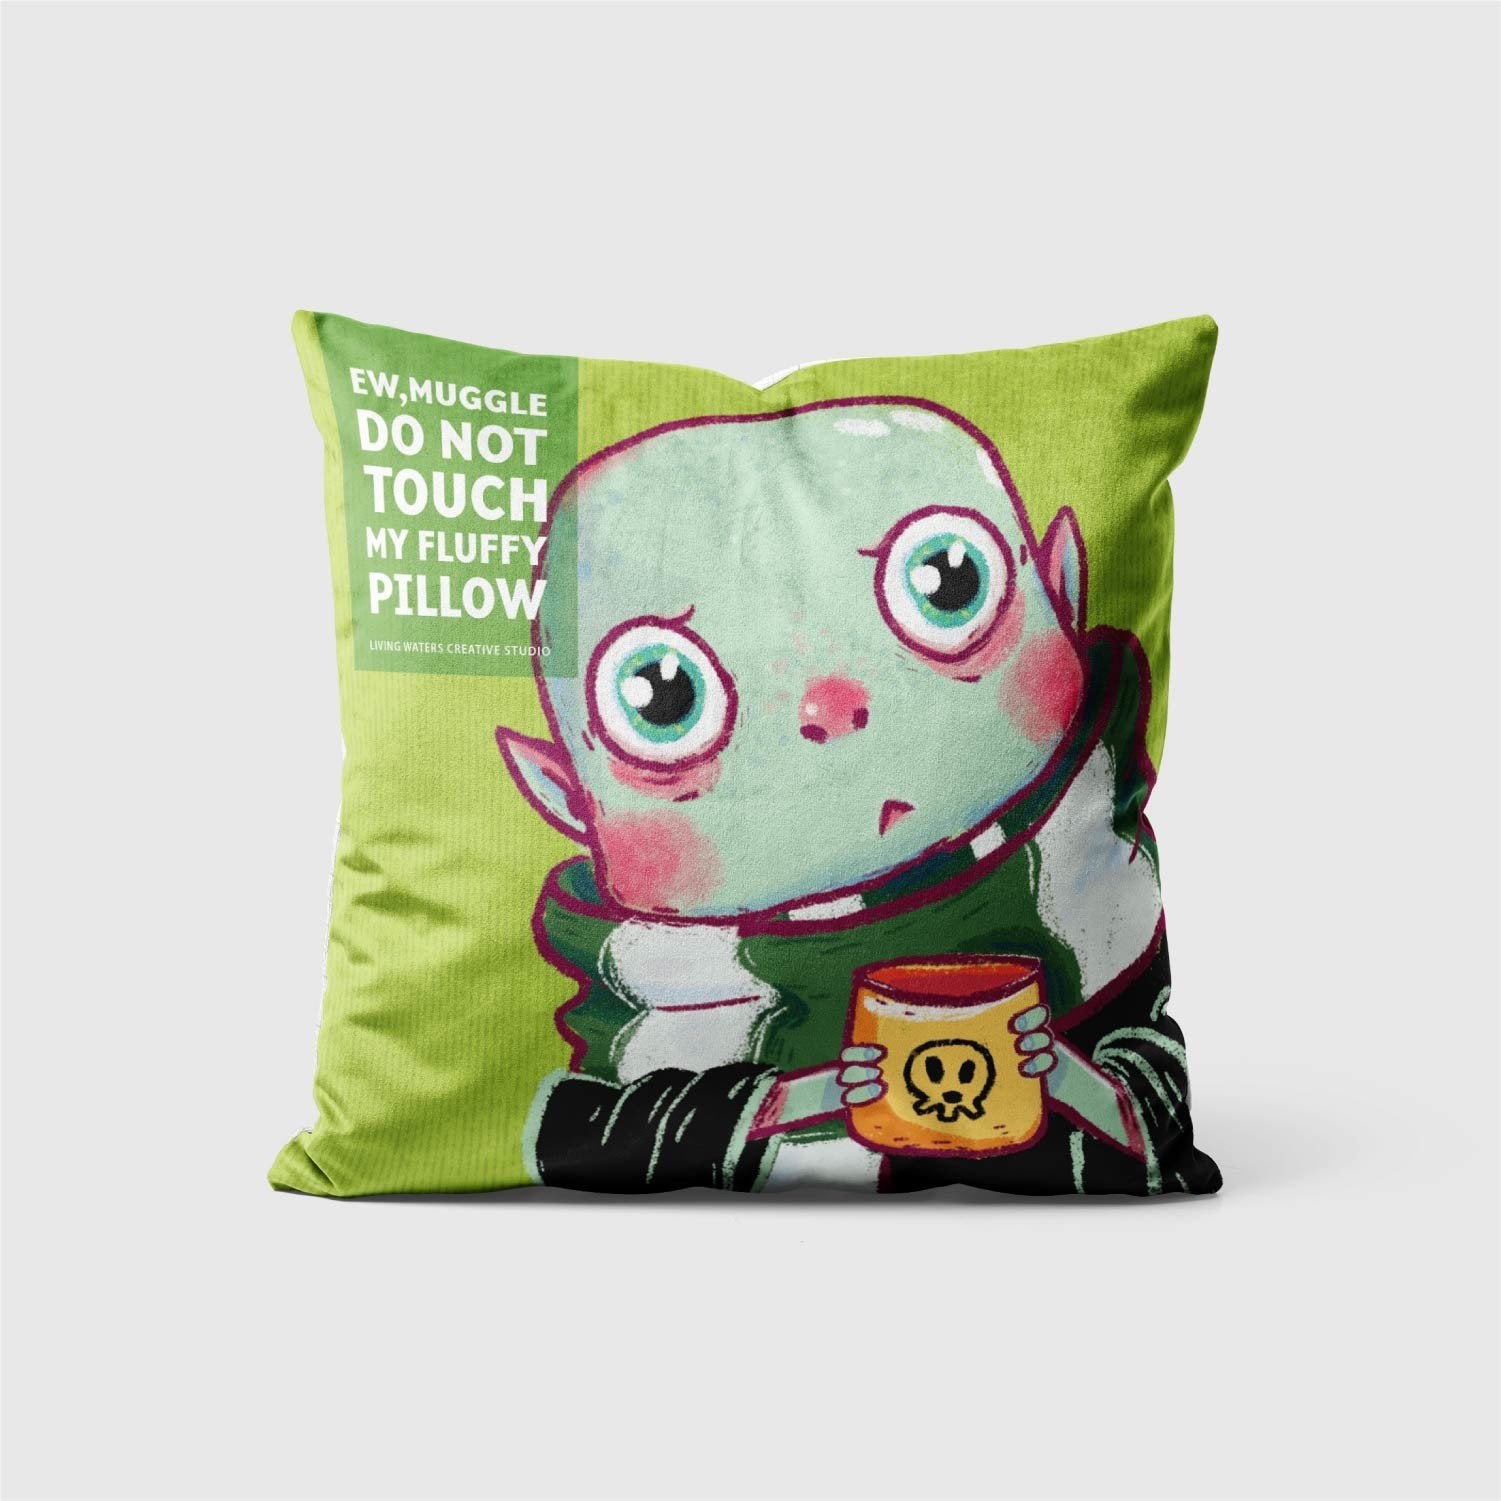 The Coldemort Cushion Cover